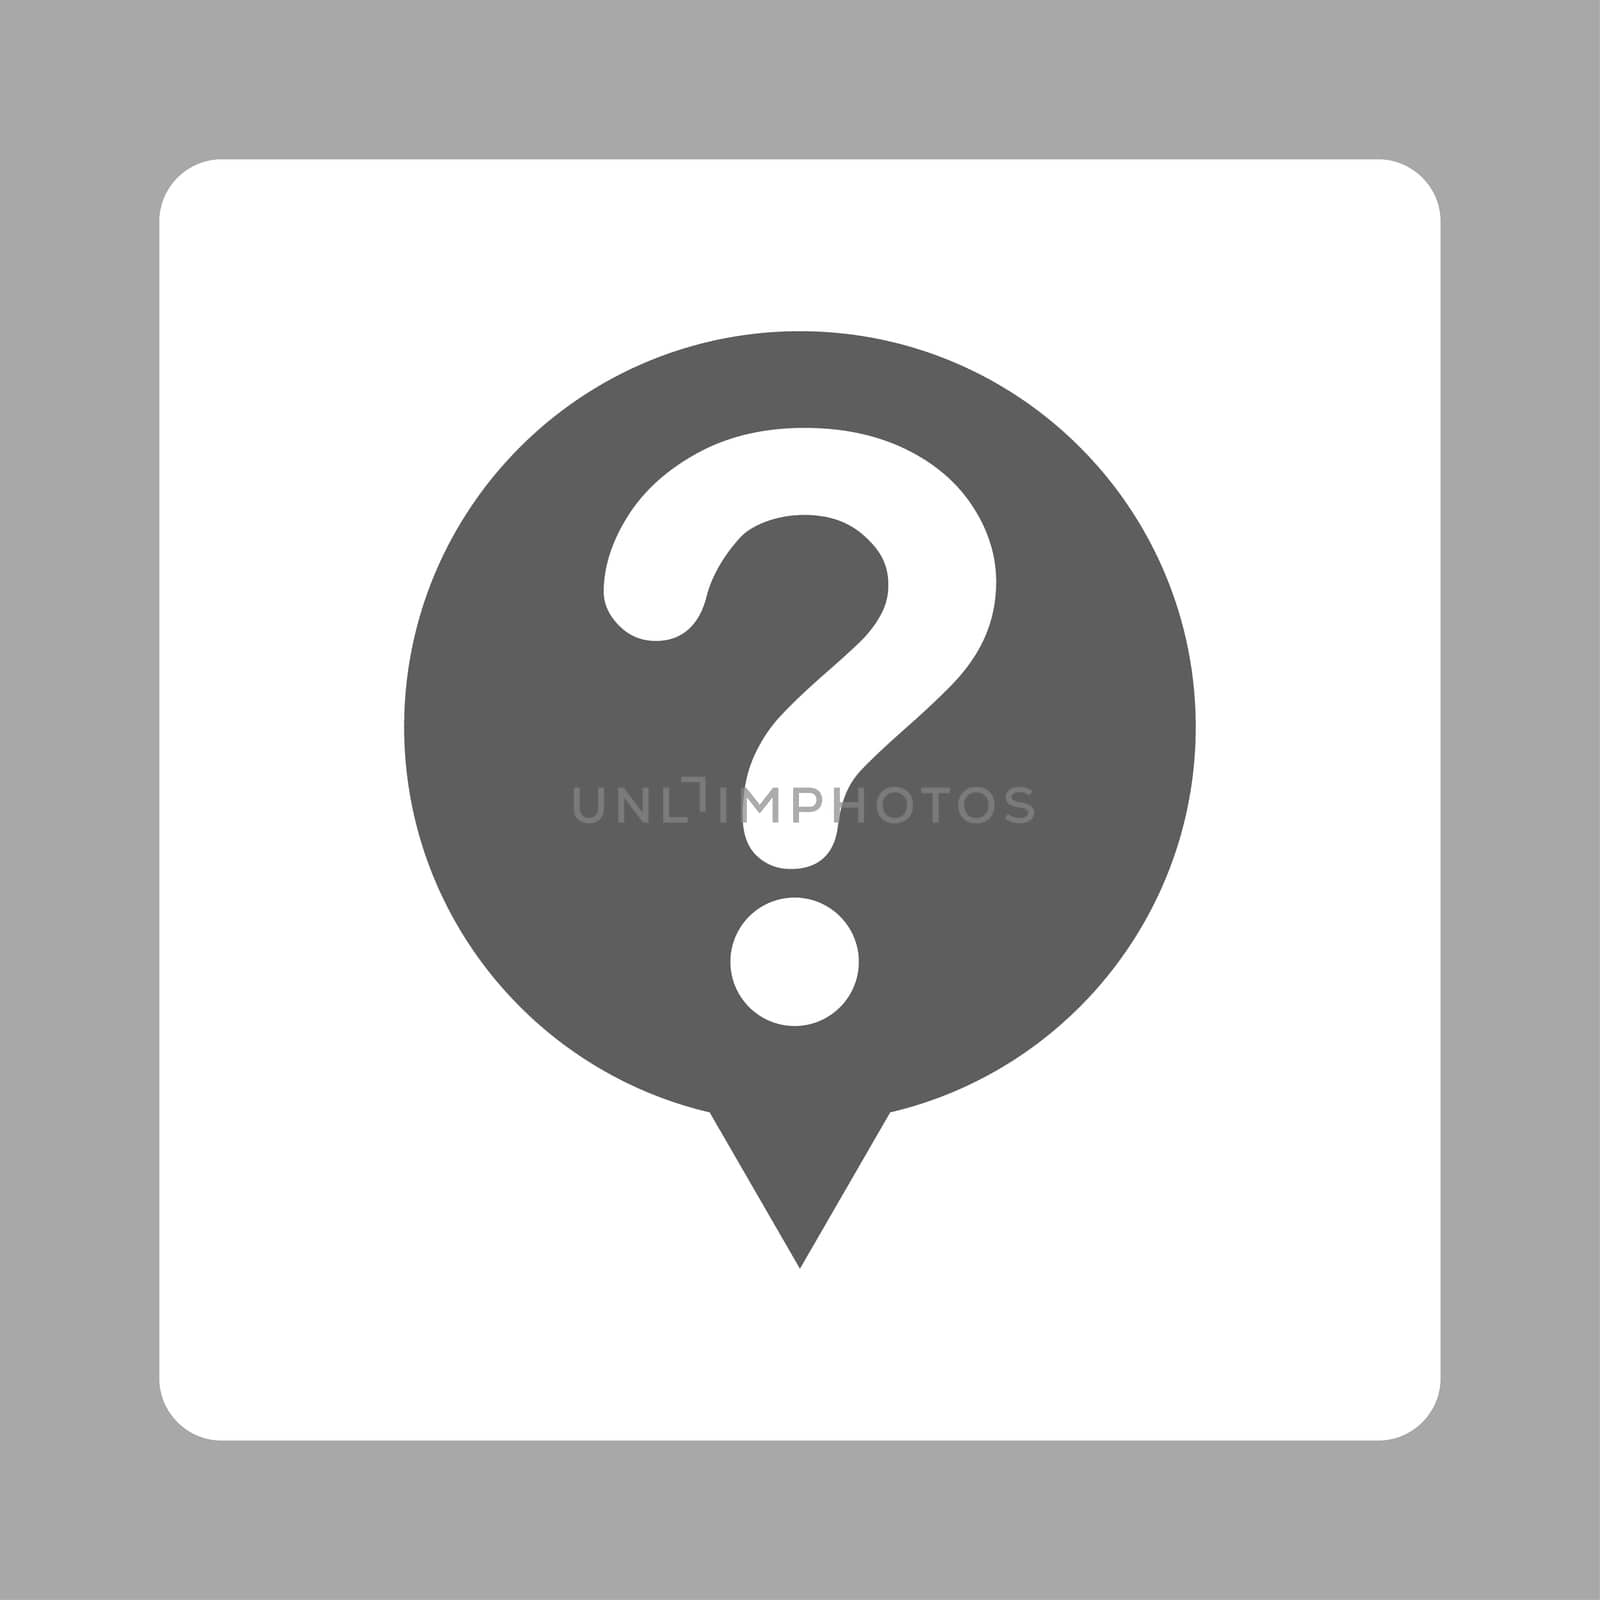 Status icon from Primitive Buttons OverColor Set. This rounded square flat button is drawn with dark gray and white colors on a silver background.